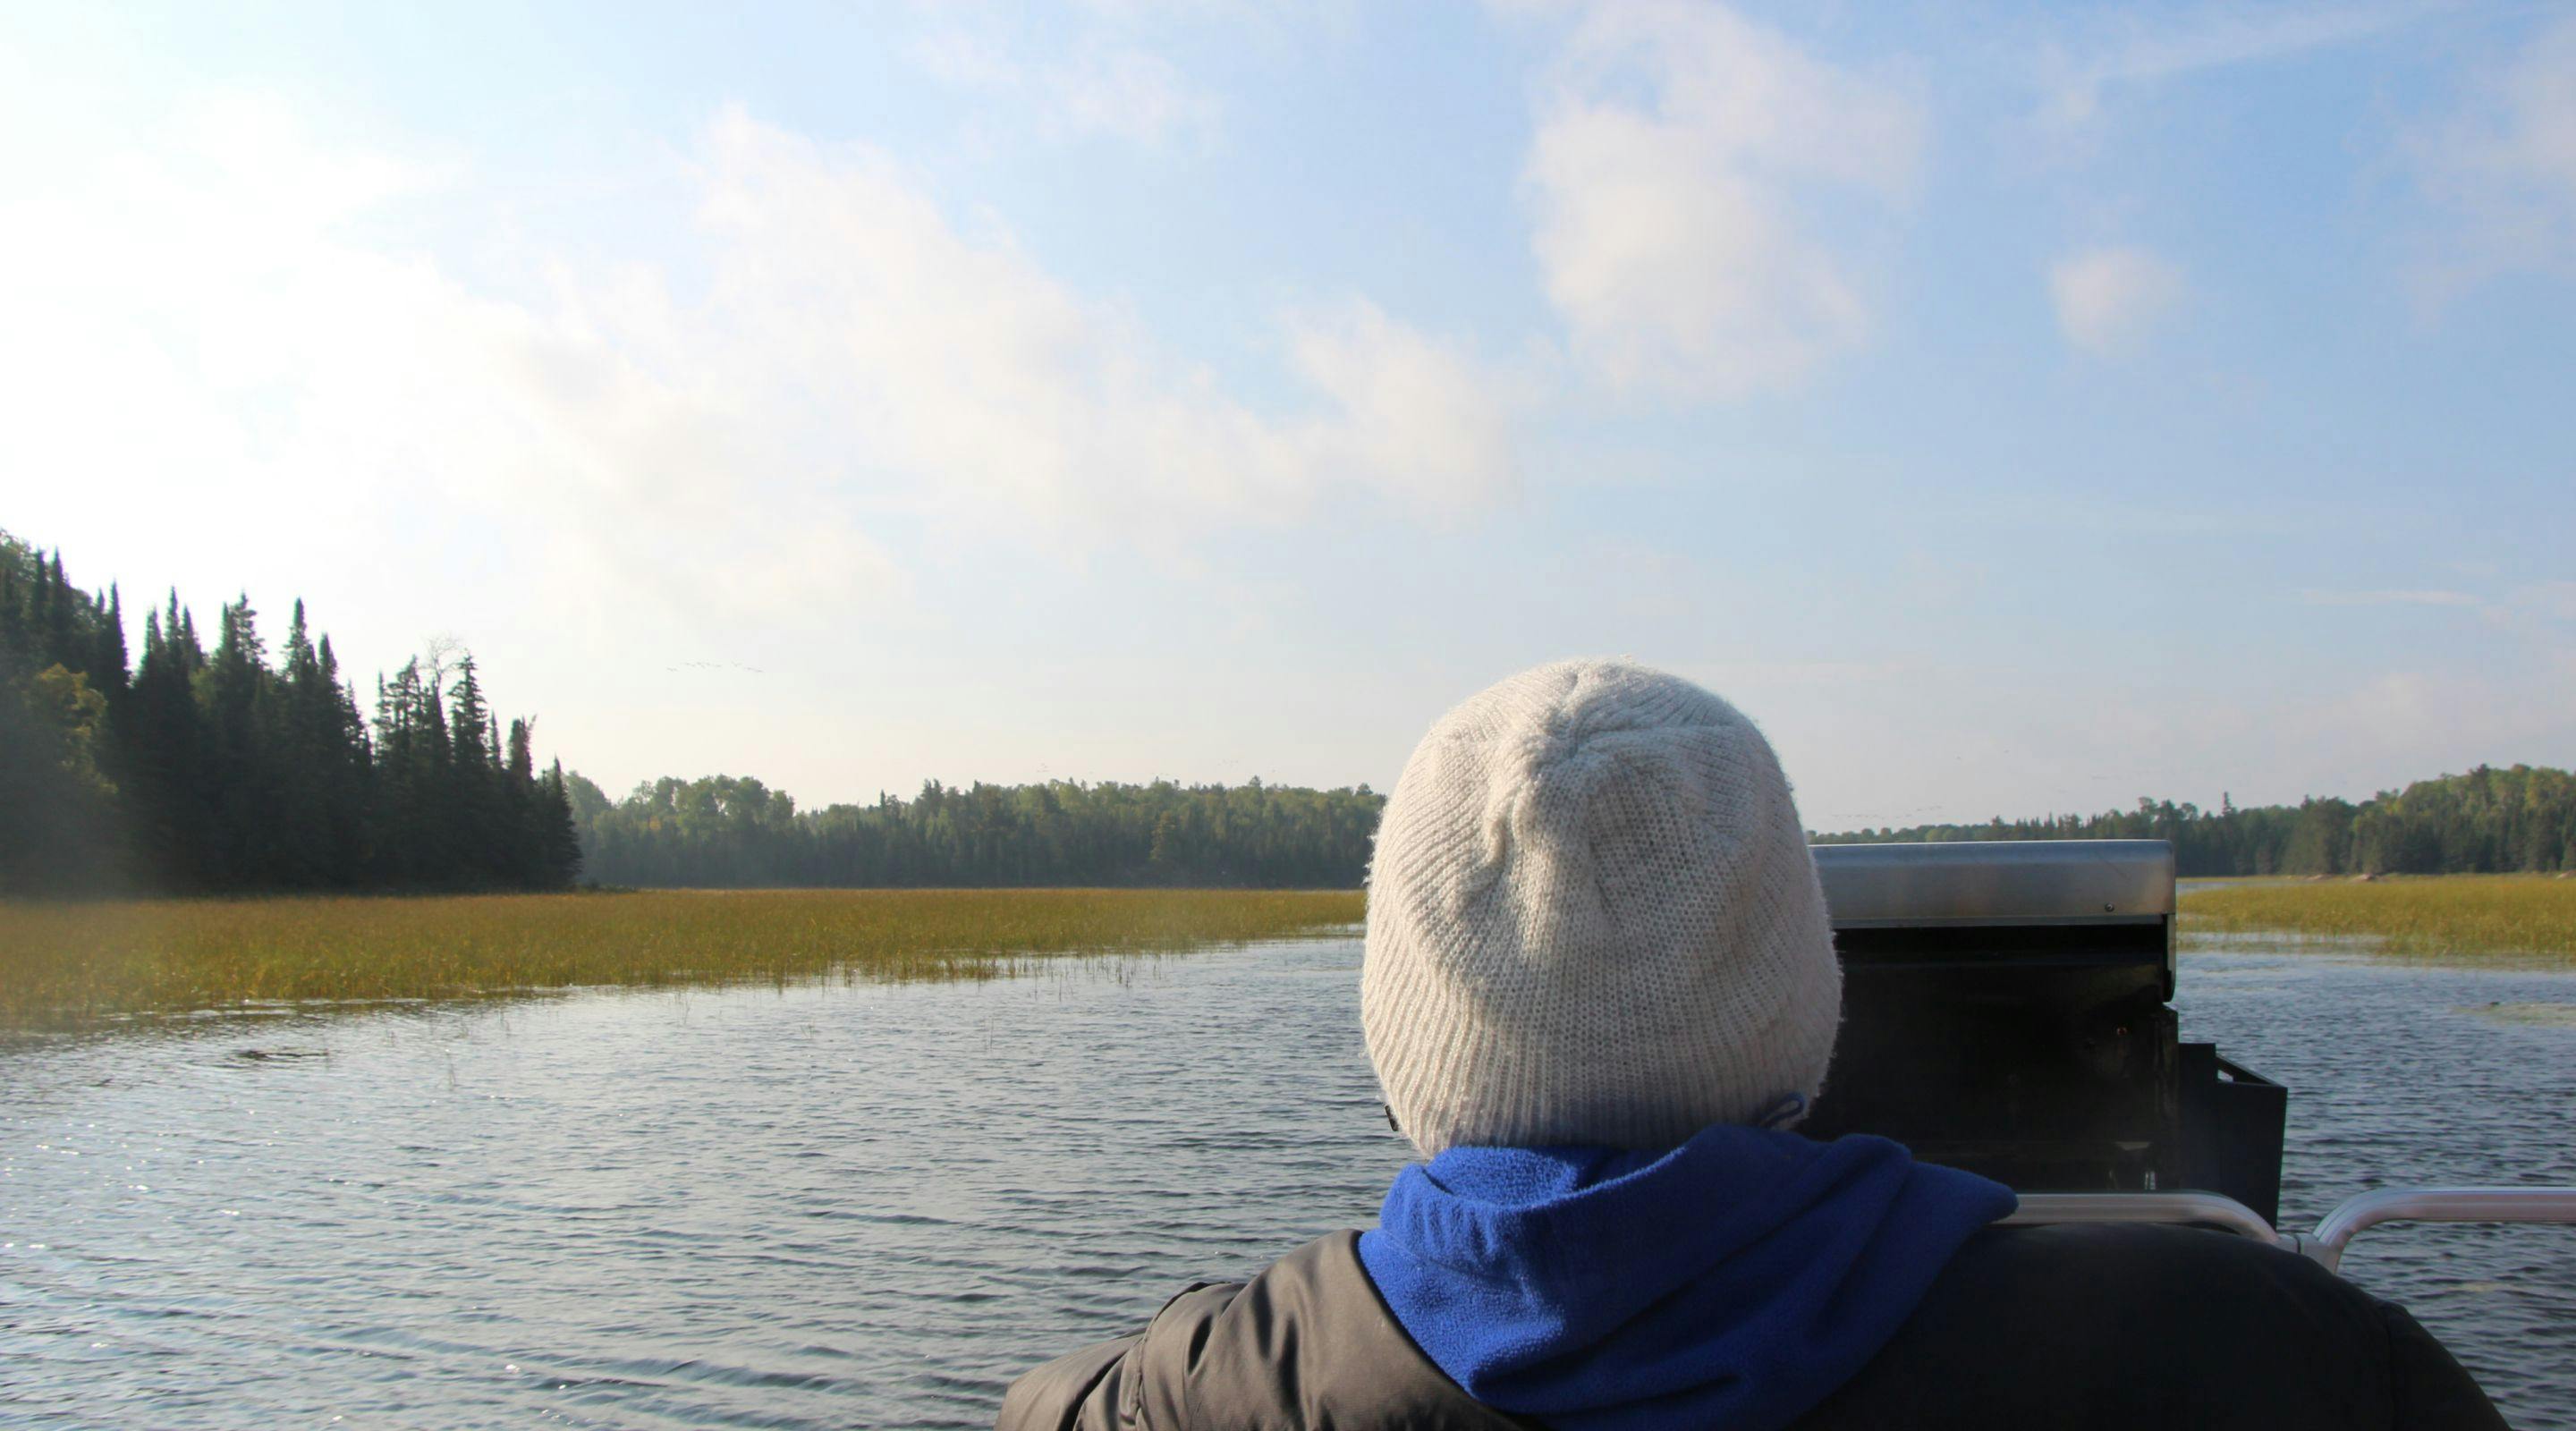 The back of a person wearing a toque jacket sitting in a boat on the river